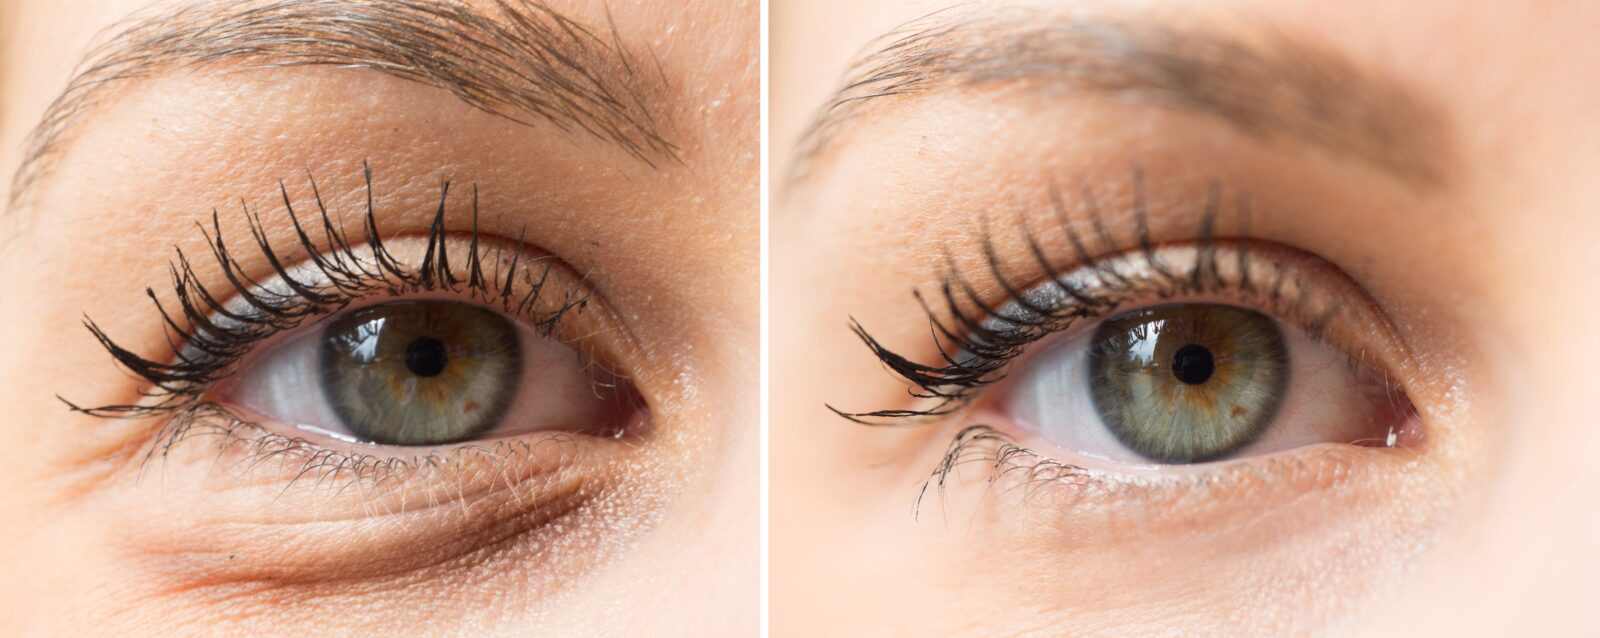 A before & after of a Blepharoplasty